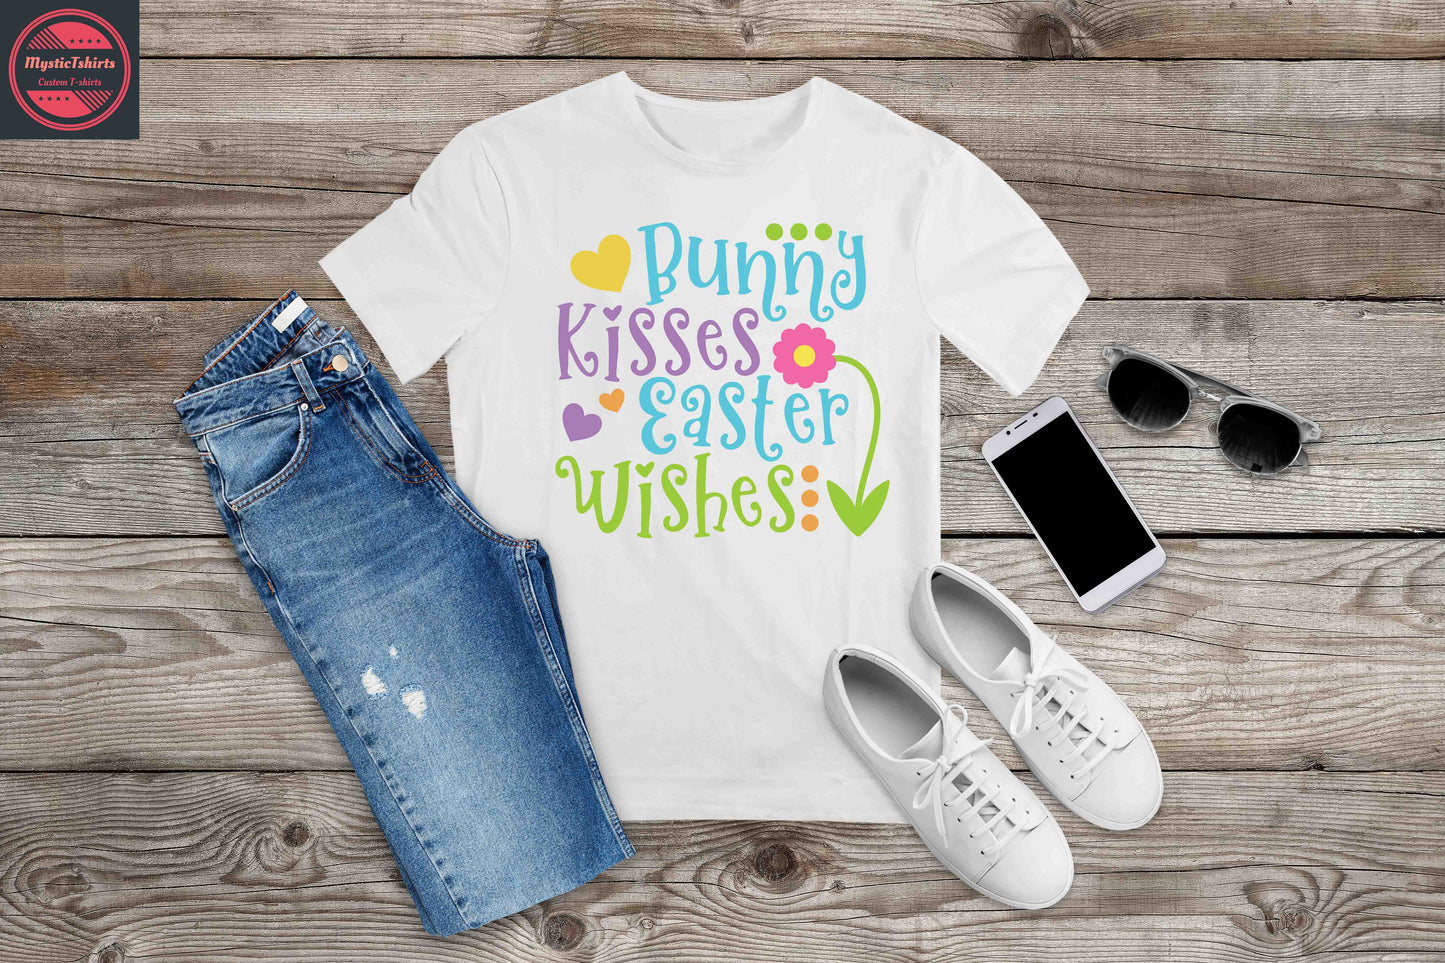 042. Bunny Kisses Easter Wishes, Custom Made Shirt, Personalized T-Shirt, Custom Text, Make Your Own Shirt, Custom Tee